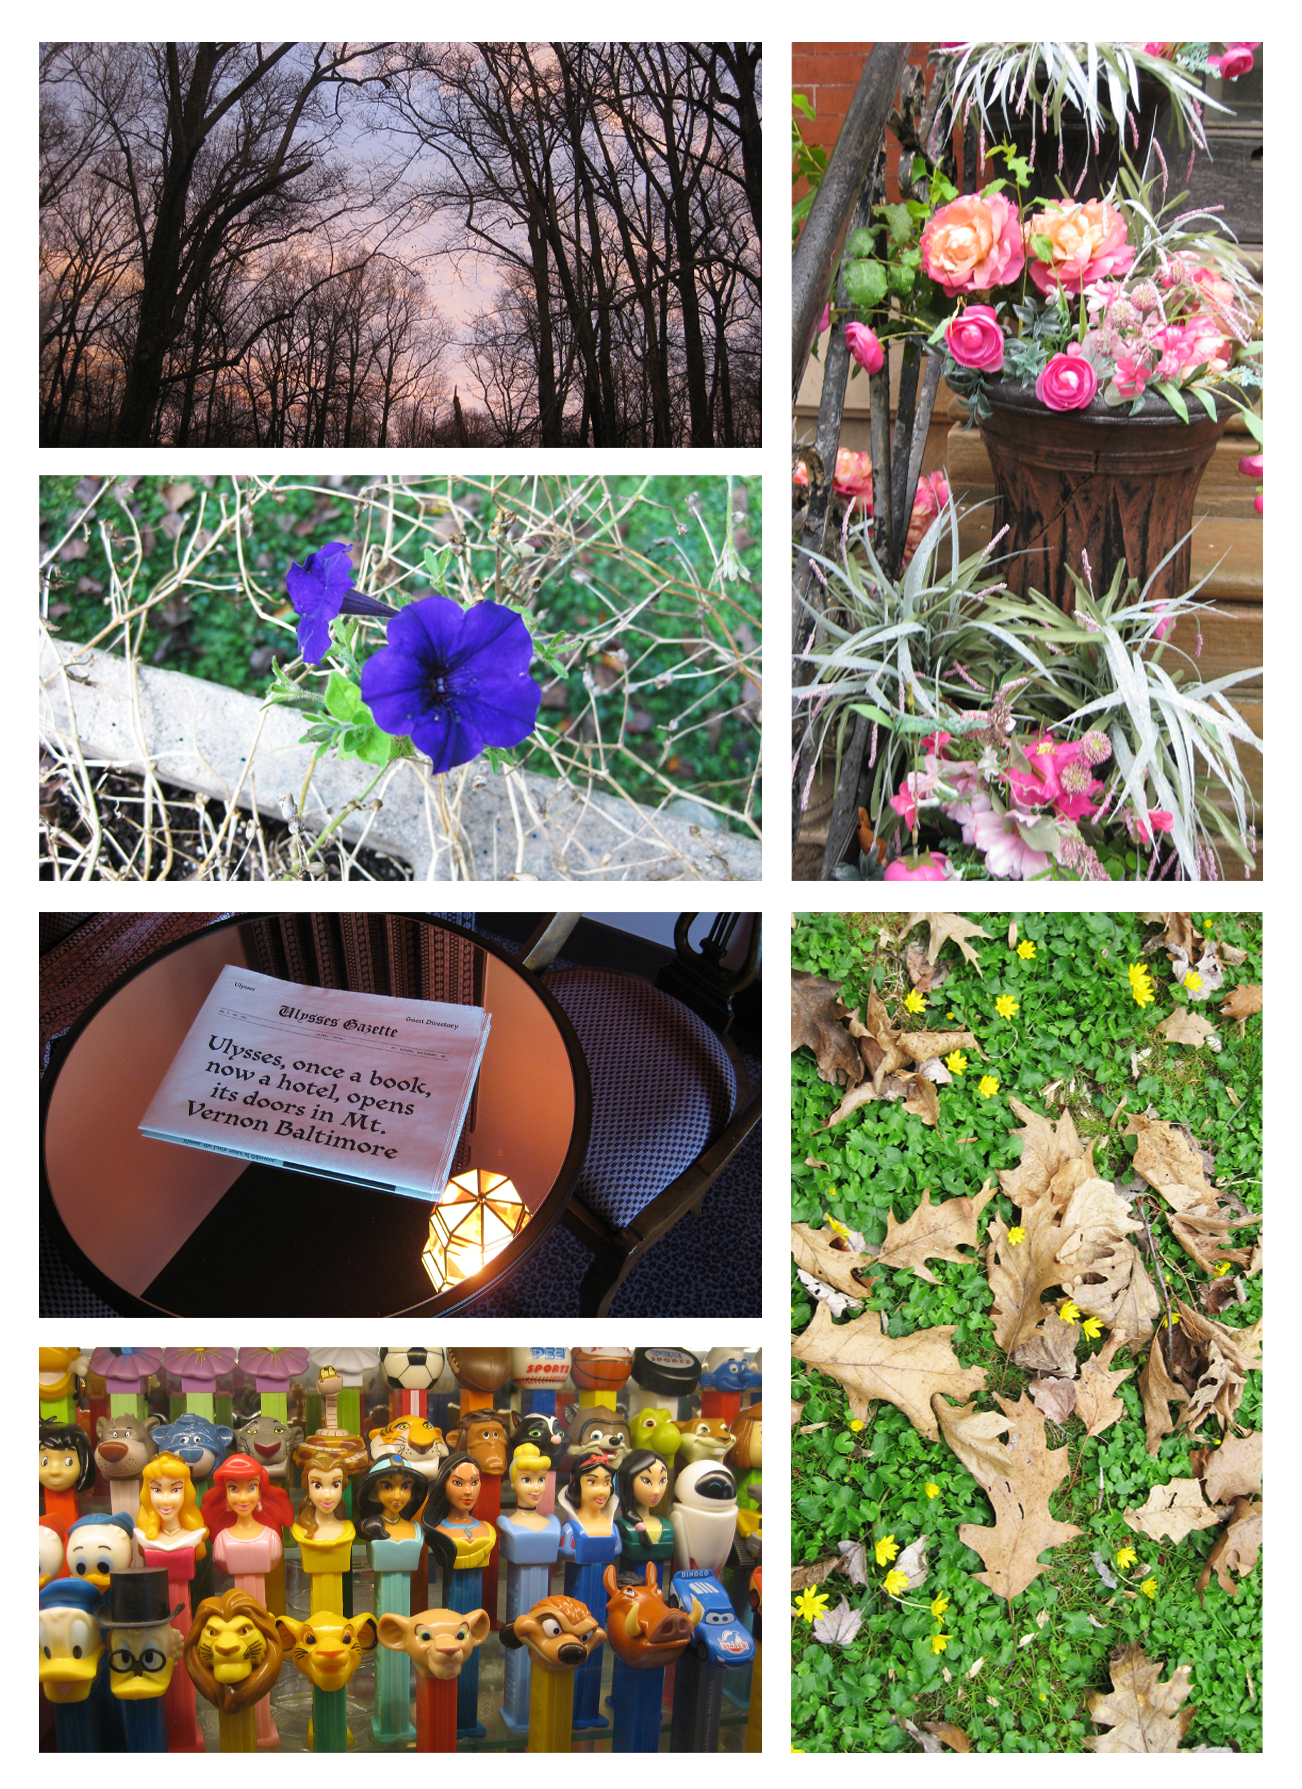 An array of digicam photographs arranged in a grid. From top left, clockwise: a pink and purple sunset through bare trees; a trio of planters containing pink flowers sit on rainy porch steps; several browned leaves are strewn across a patch of clover and buttercups; a collection of novelty Pez dispensers at the American Visionary Arts Museum; a mirrored tabletop with a newsprint communication from the Ulysses Hotel; a planter of mostly dead petunia stems with one purple flower remaining.